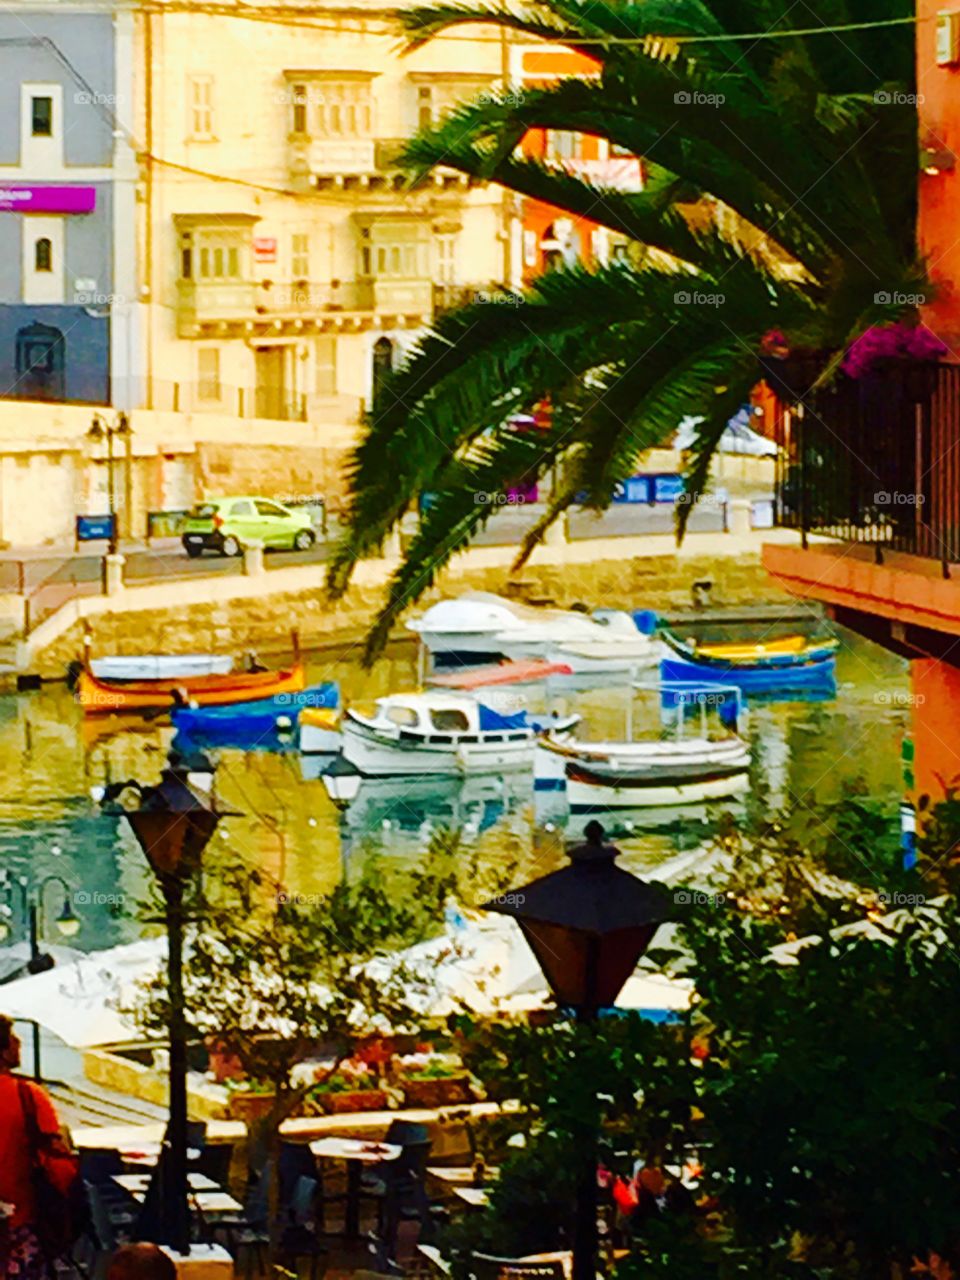 Local Colours. View of the boats in Spinola Bay, Malta, through gap between buildings.